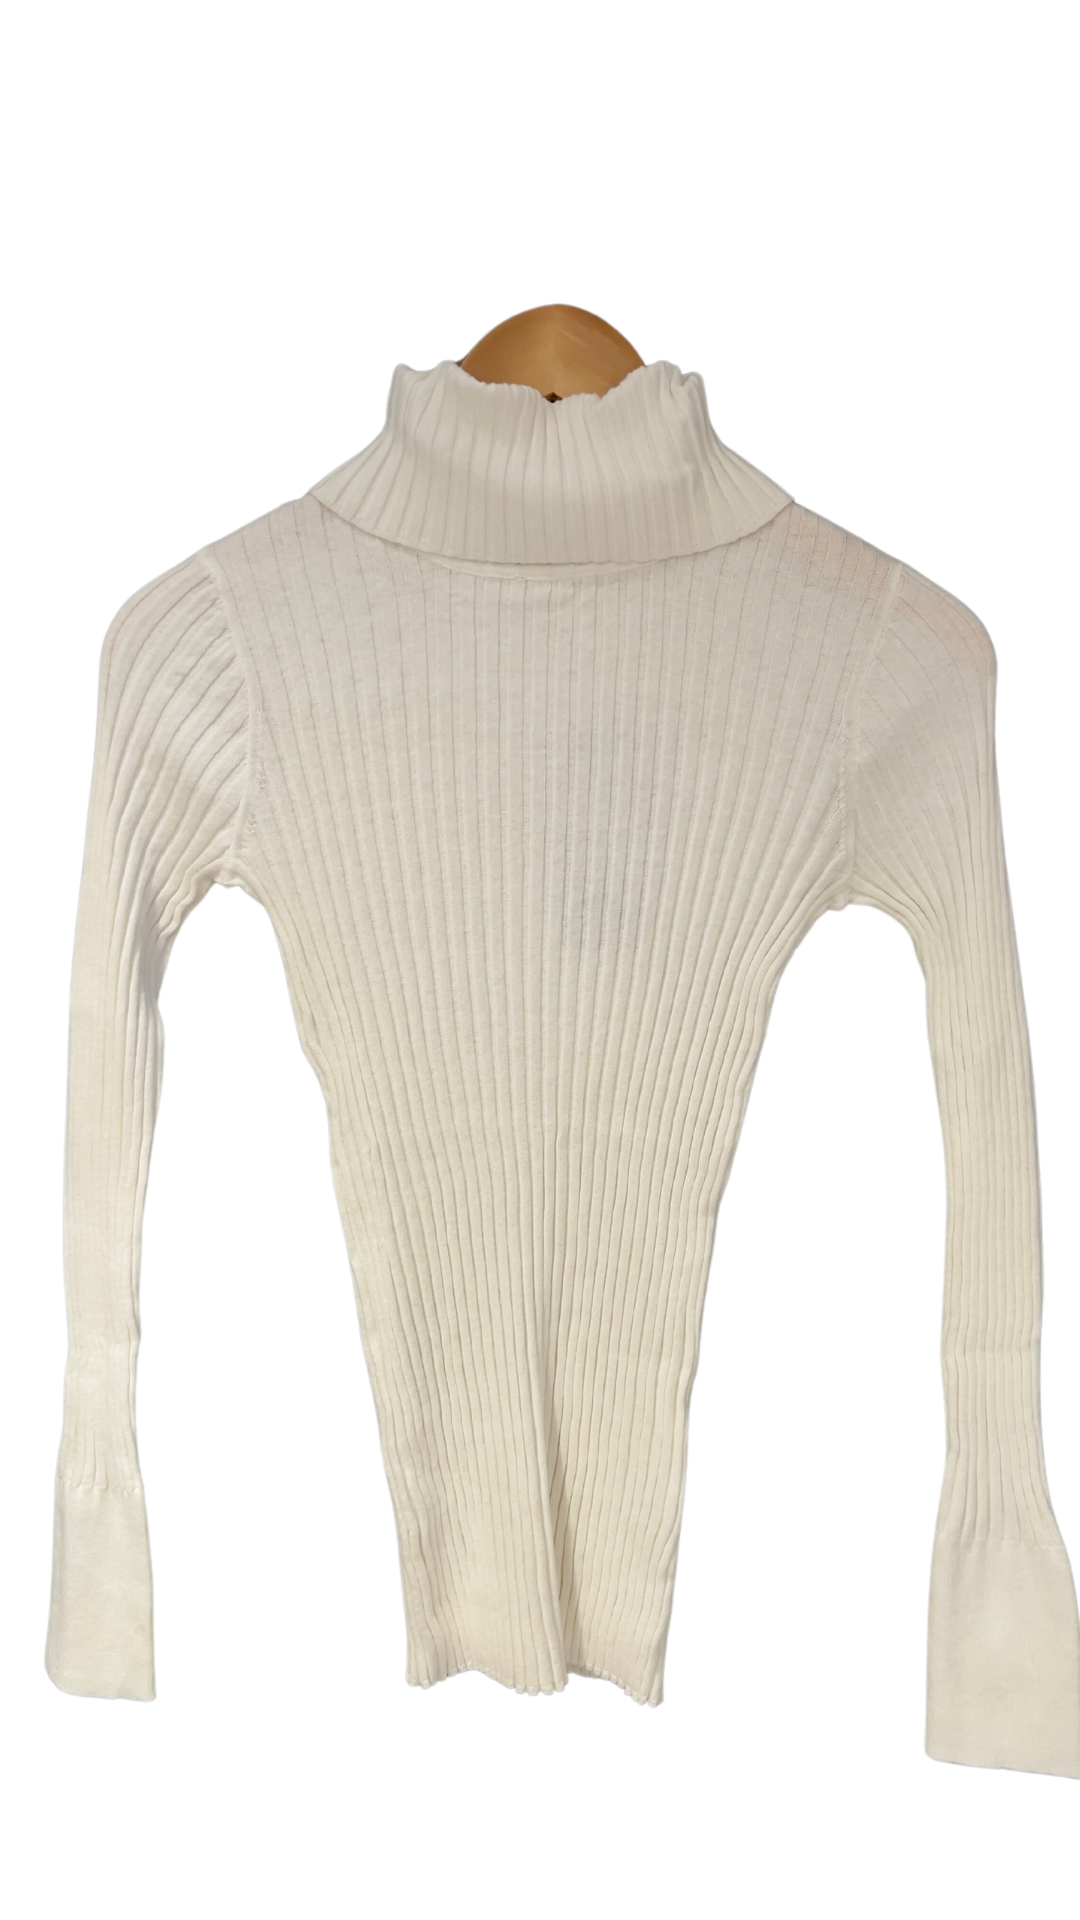 Ribbed Turtleneck Sweater in Cream